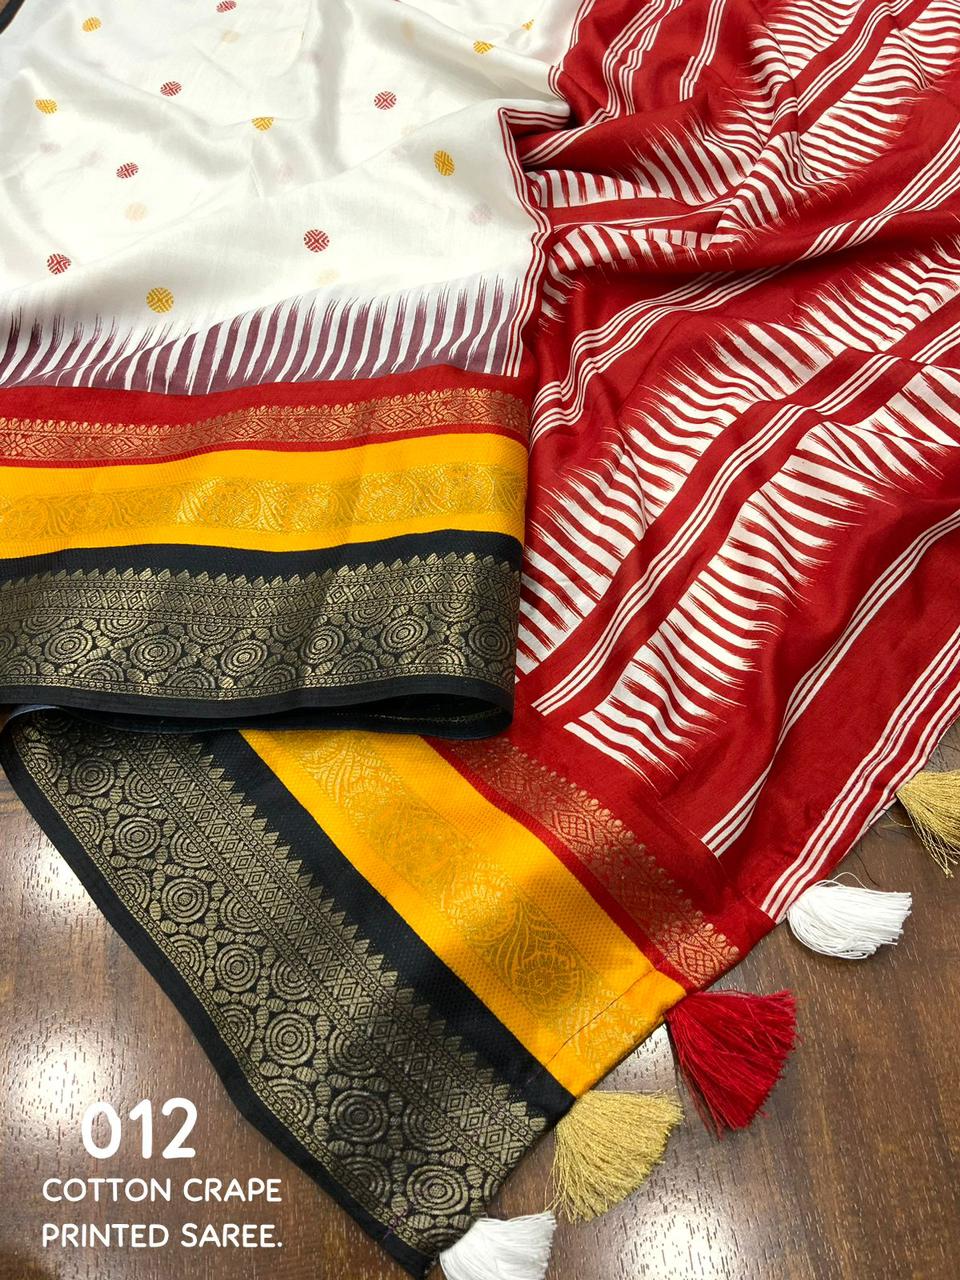 "Timeless Elegance: Soft Cotton Crape Saree with Woven Zari Border and Contrast Black Blouse - Perfectly Crafted Harmony of Printing and Weaving"